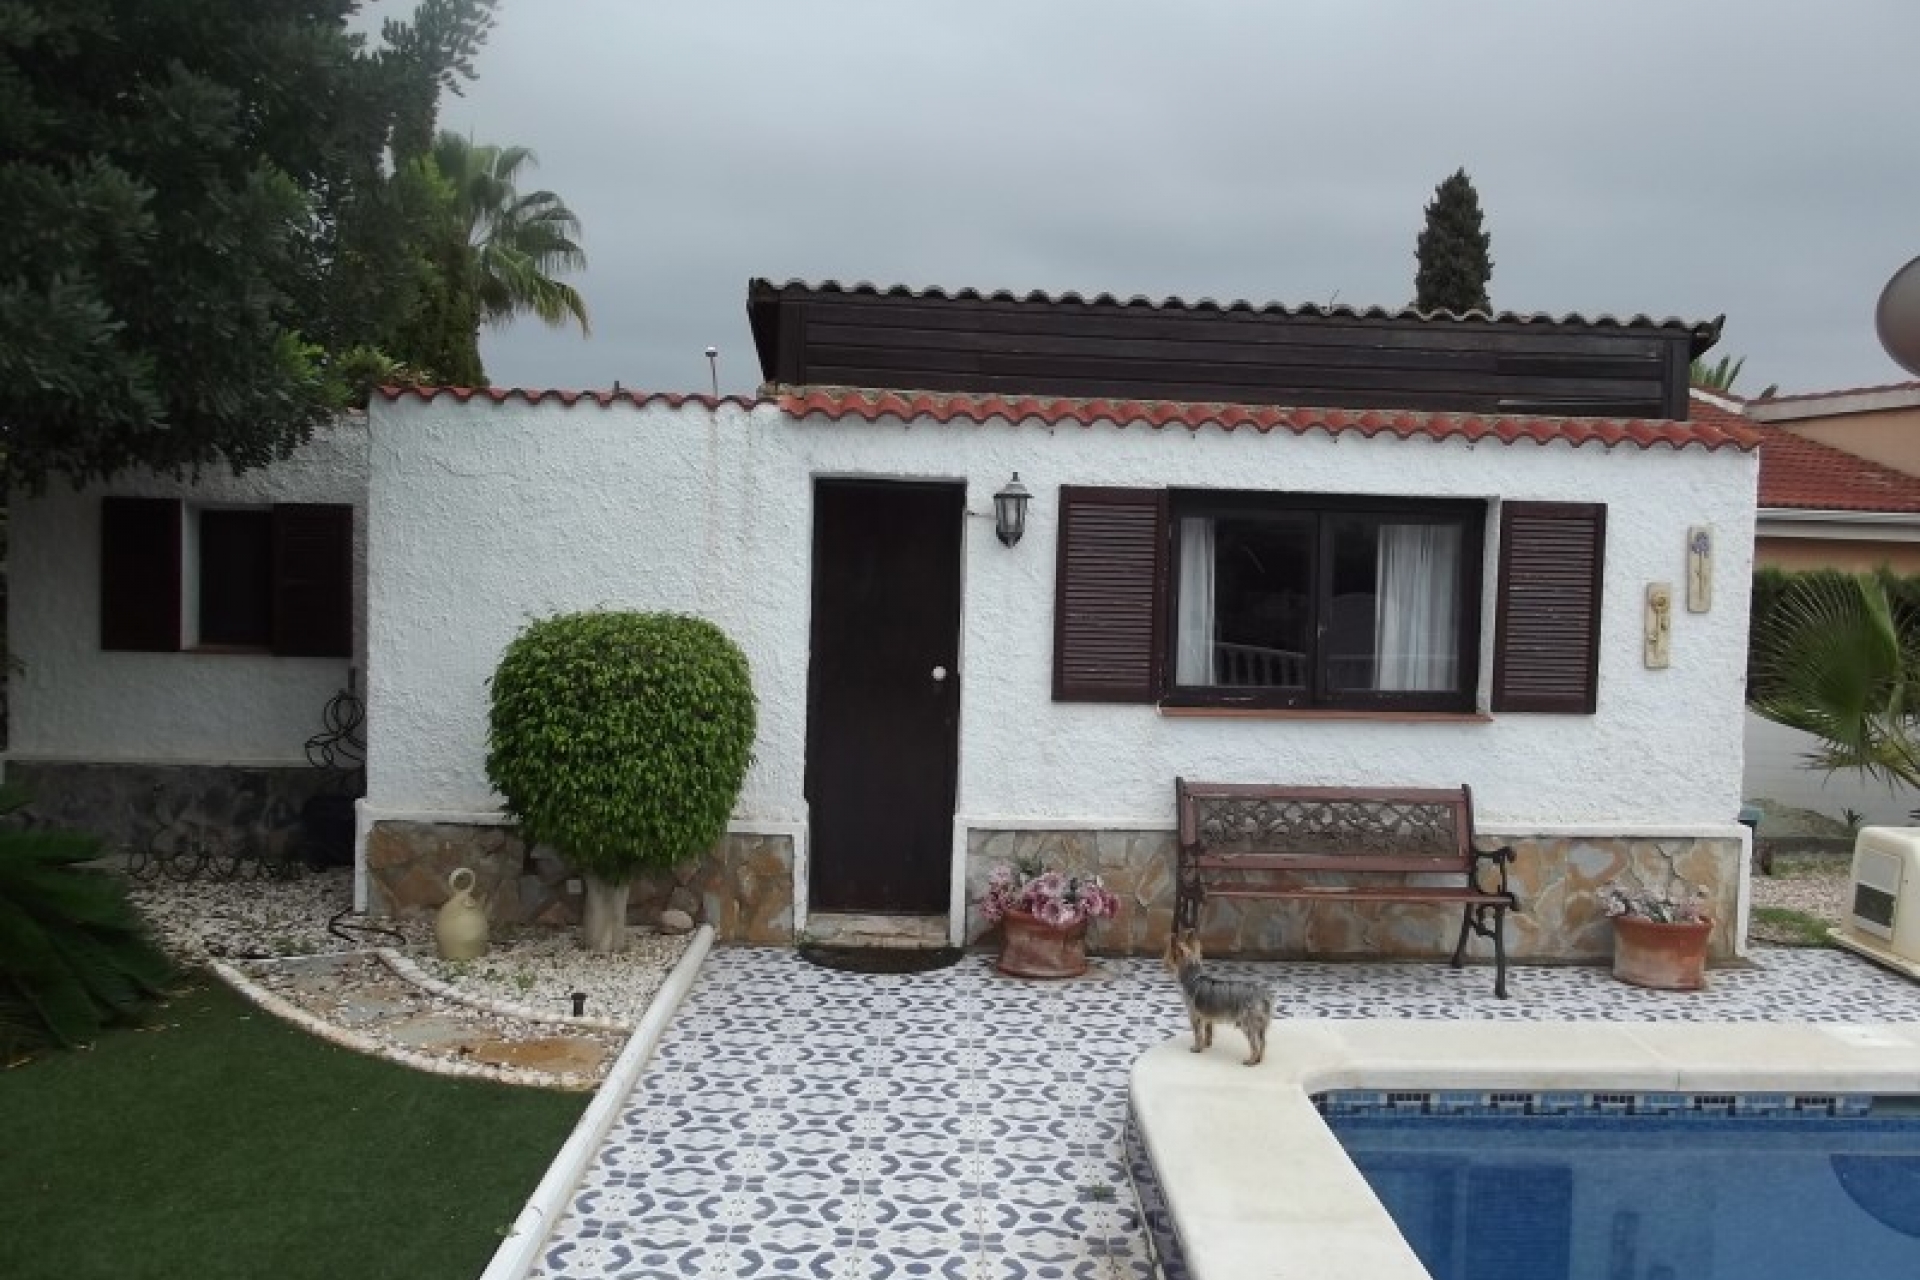 Near Guardamar and Torrevieja on Spains Costa Blanca, cheap, bargain property for sale in Ciudad Quesada.